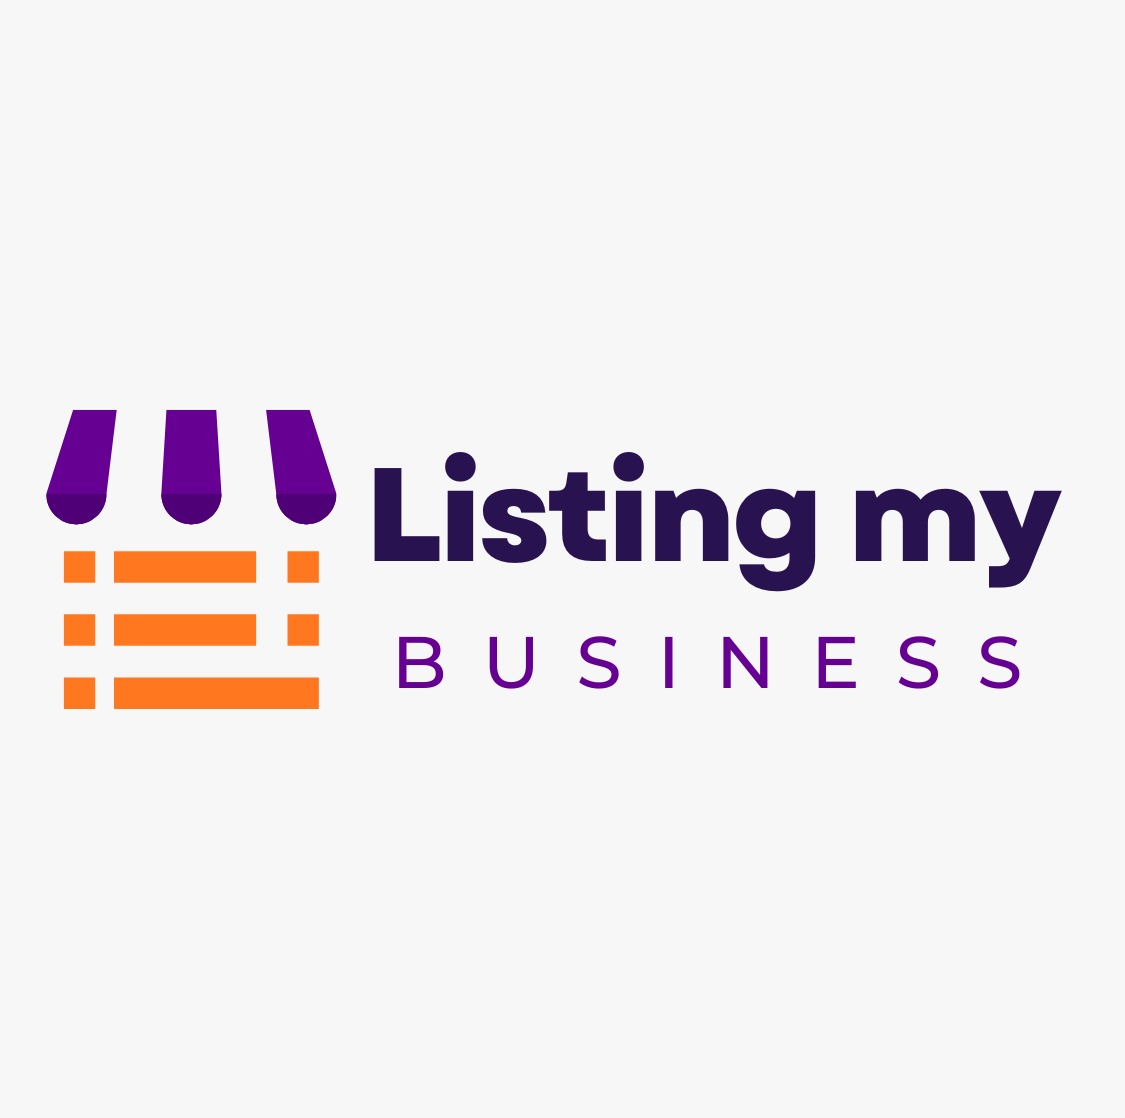 This is a listing  business sites